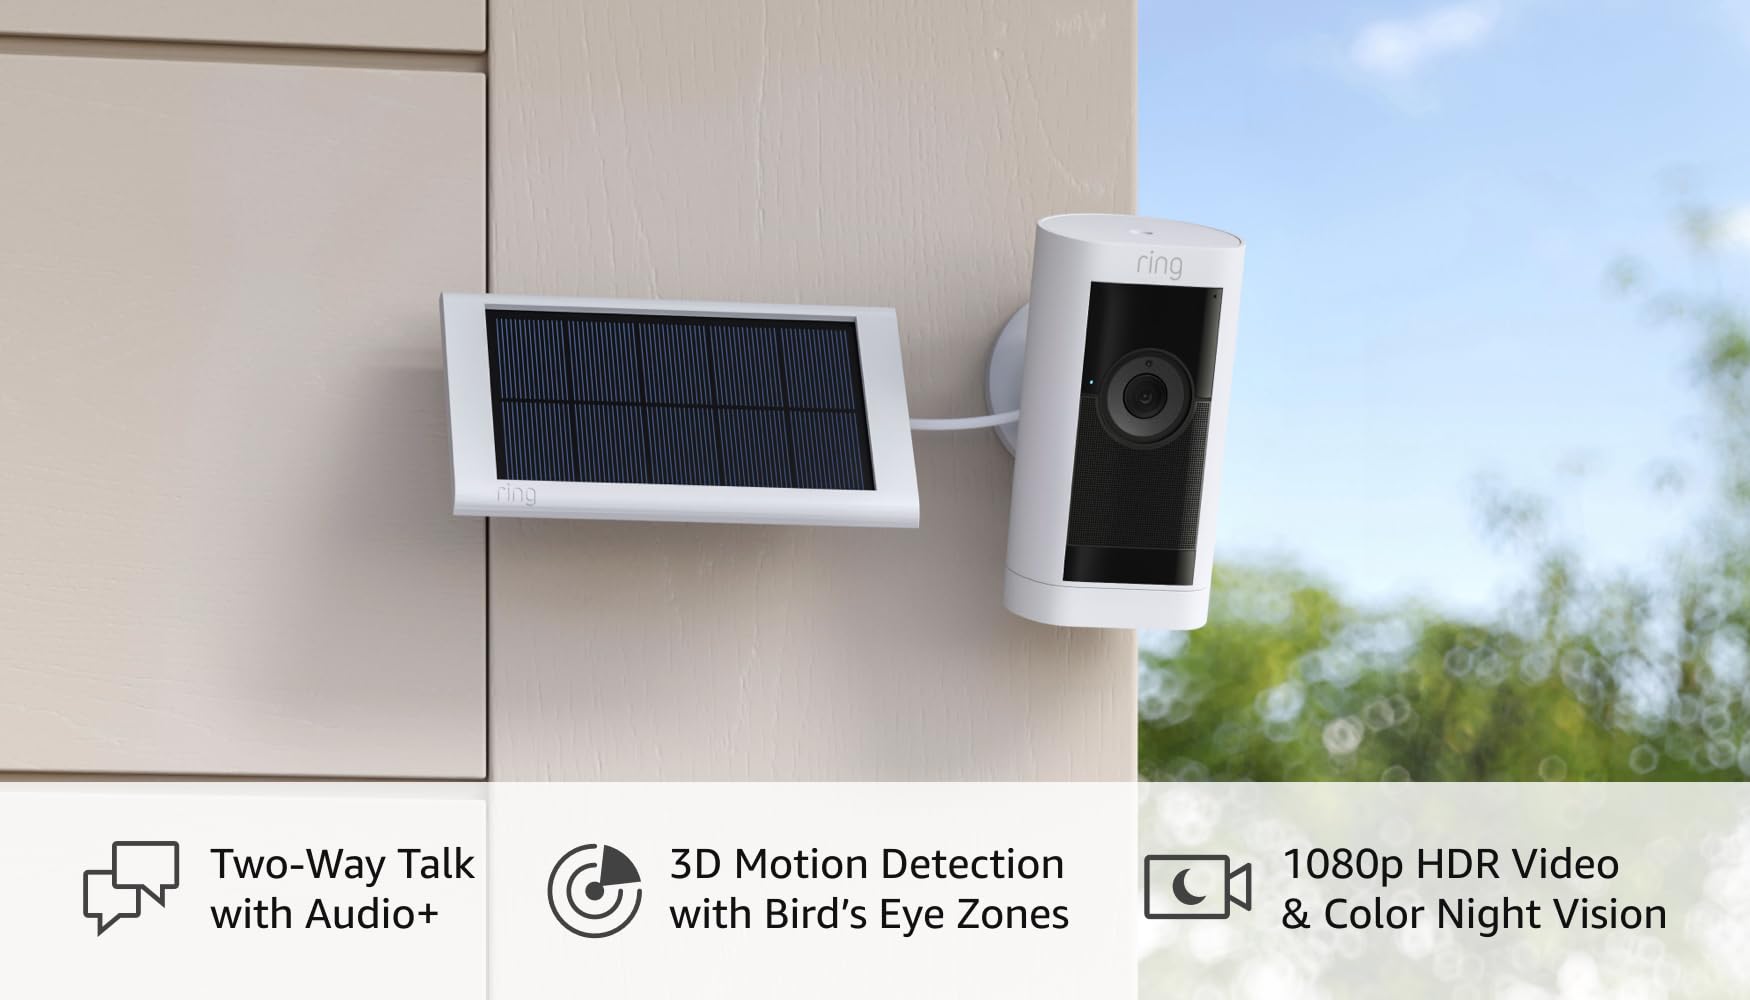 Introducing Ring Stick Up Cam Pro, Solar | Two-Way Talk with Audio+, 3D Motion Detection with Bird’s Eye Zones, 1080p HDR Video & Color Night Vision (2023 release), White